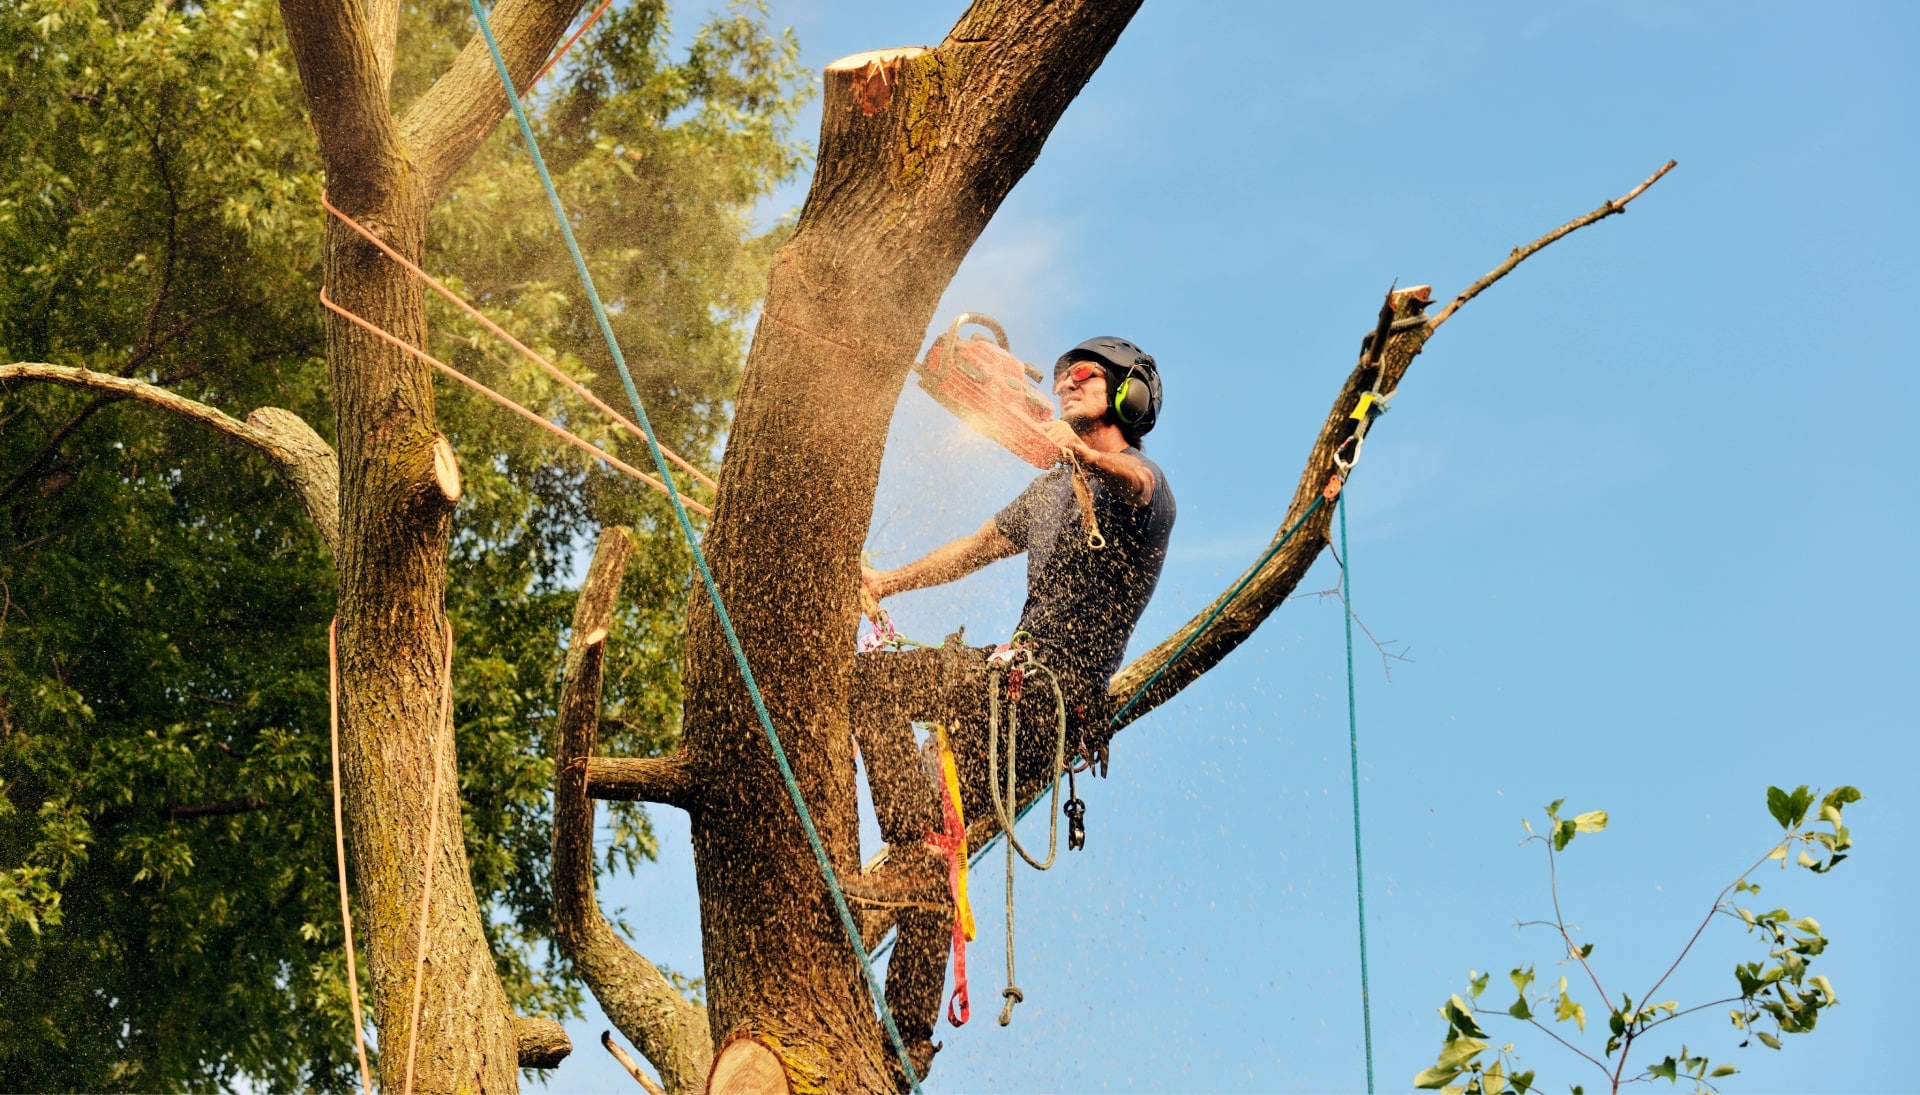 Jefferson City tree removal experts solve tree issues.